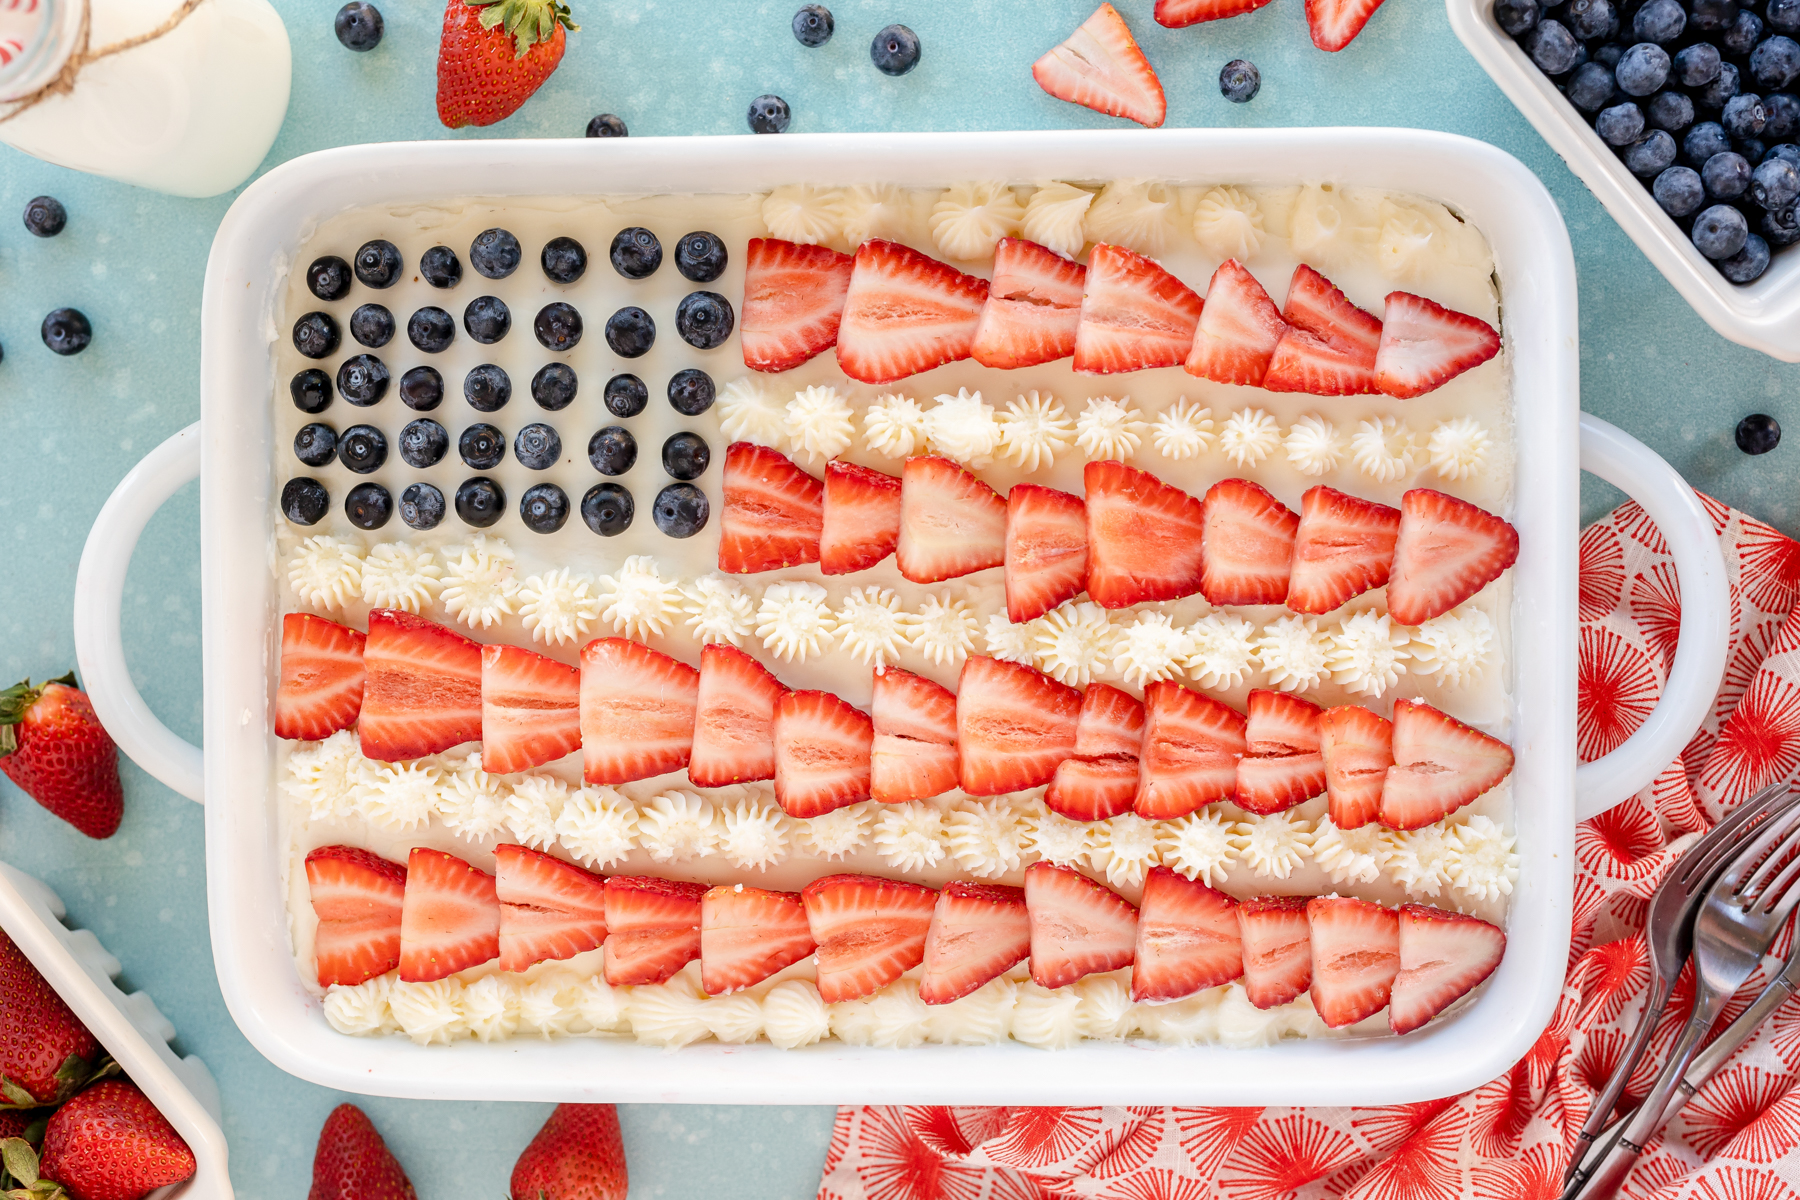 American flag cake made with fruit